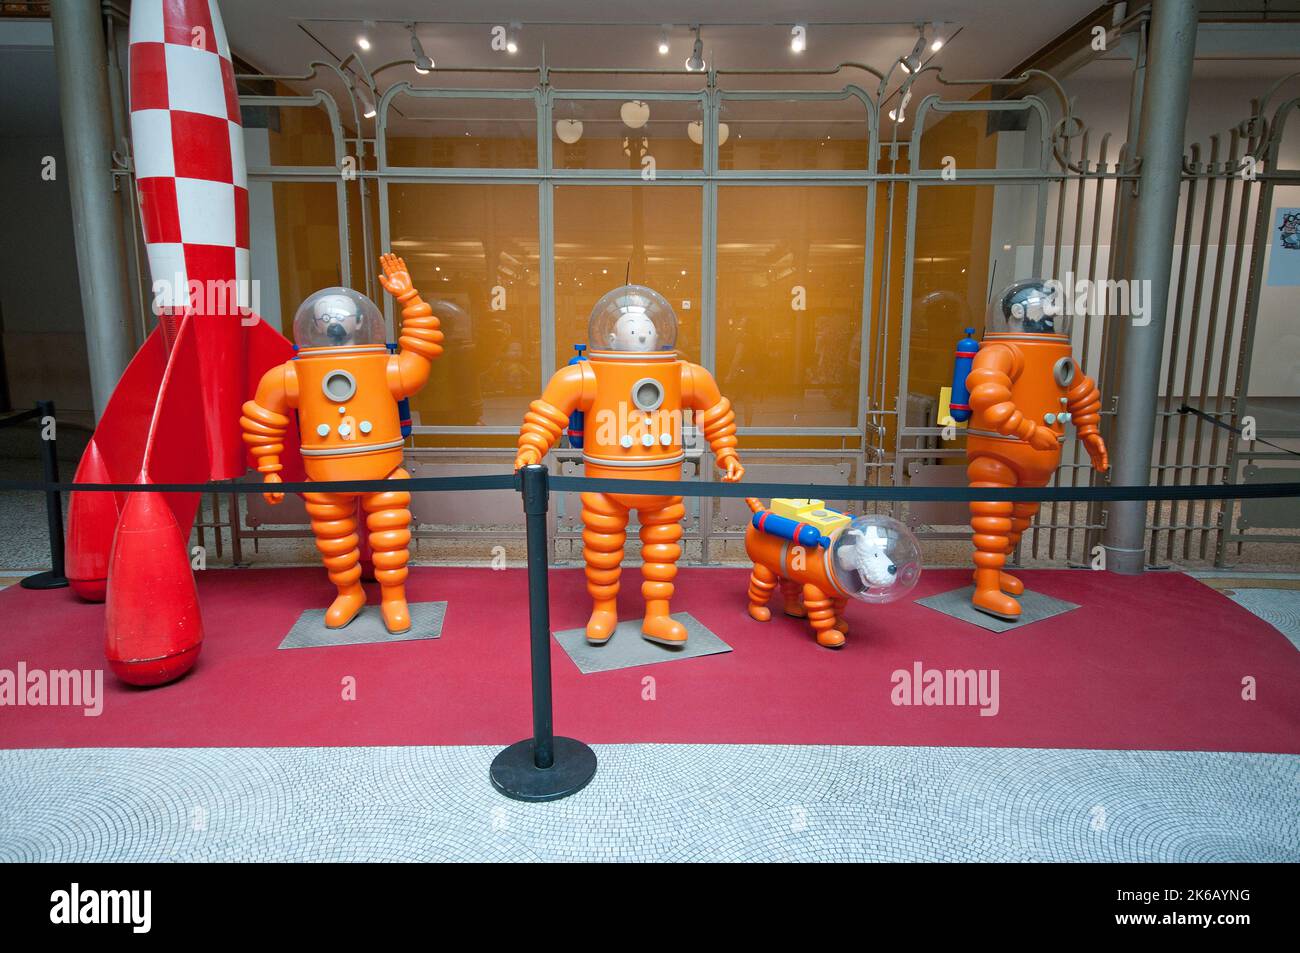 Statues of The professor Calculus, Tintin with his little dog Milou and captain Haddock with space suits in Comics Art Museum, Brussels, Belgium Stock Photo